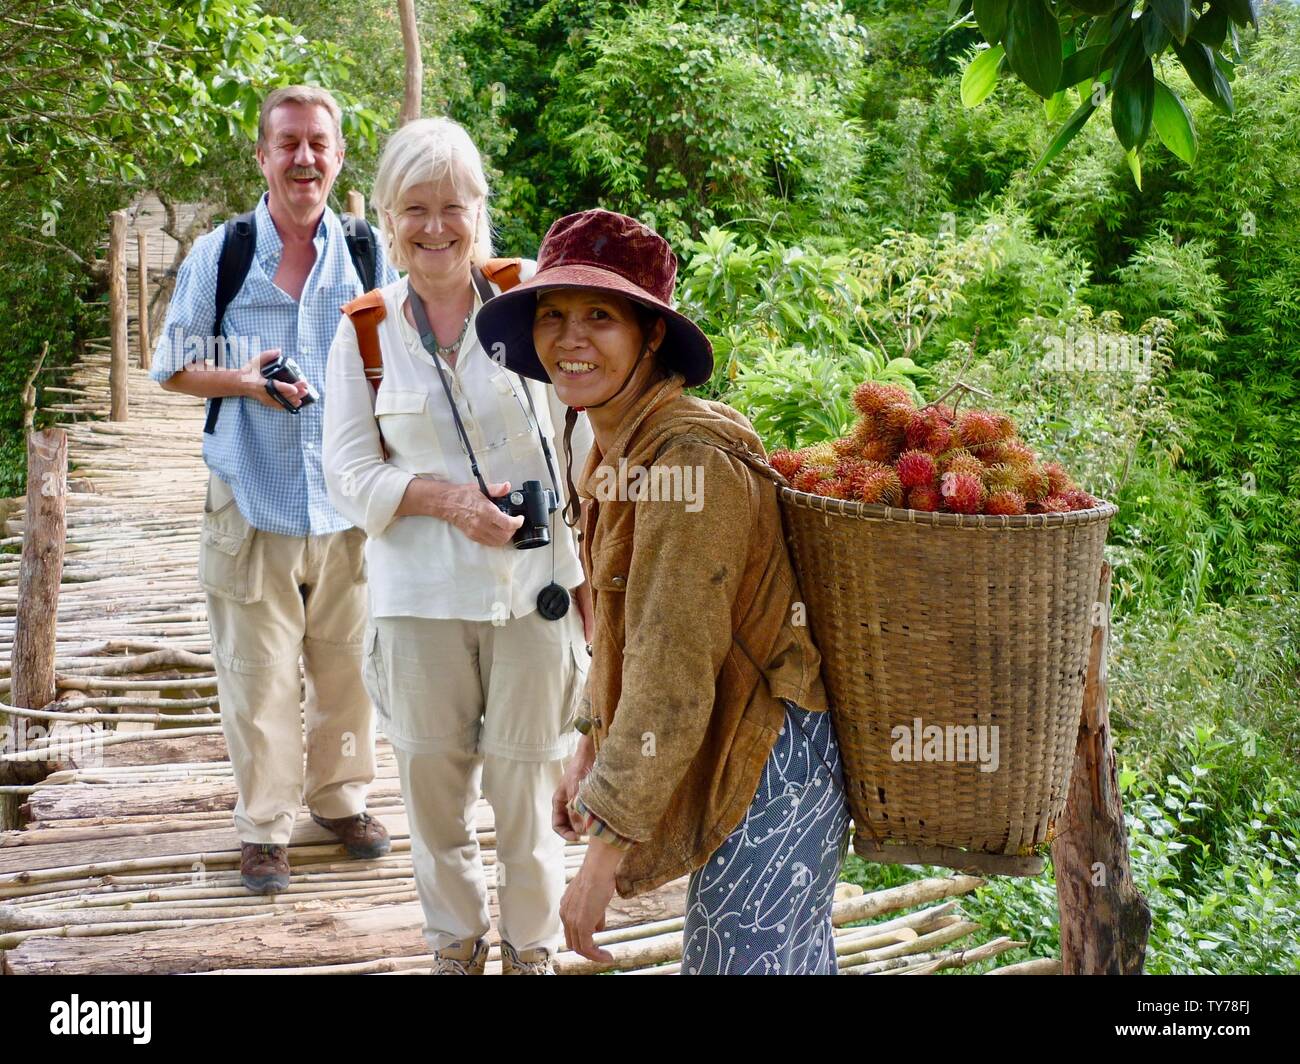 A smiling European couple pose for photo on bridge in countryside with friendly Vietnamese woman carrying basket of rambutan fruit on her back Stock Photo